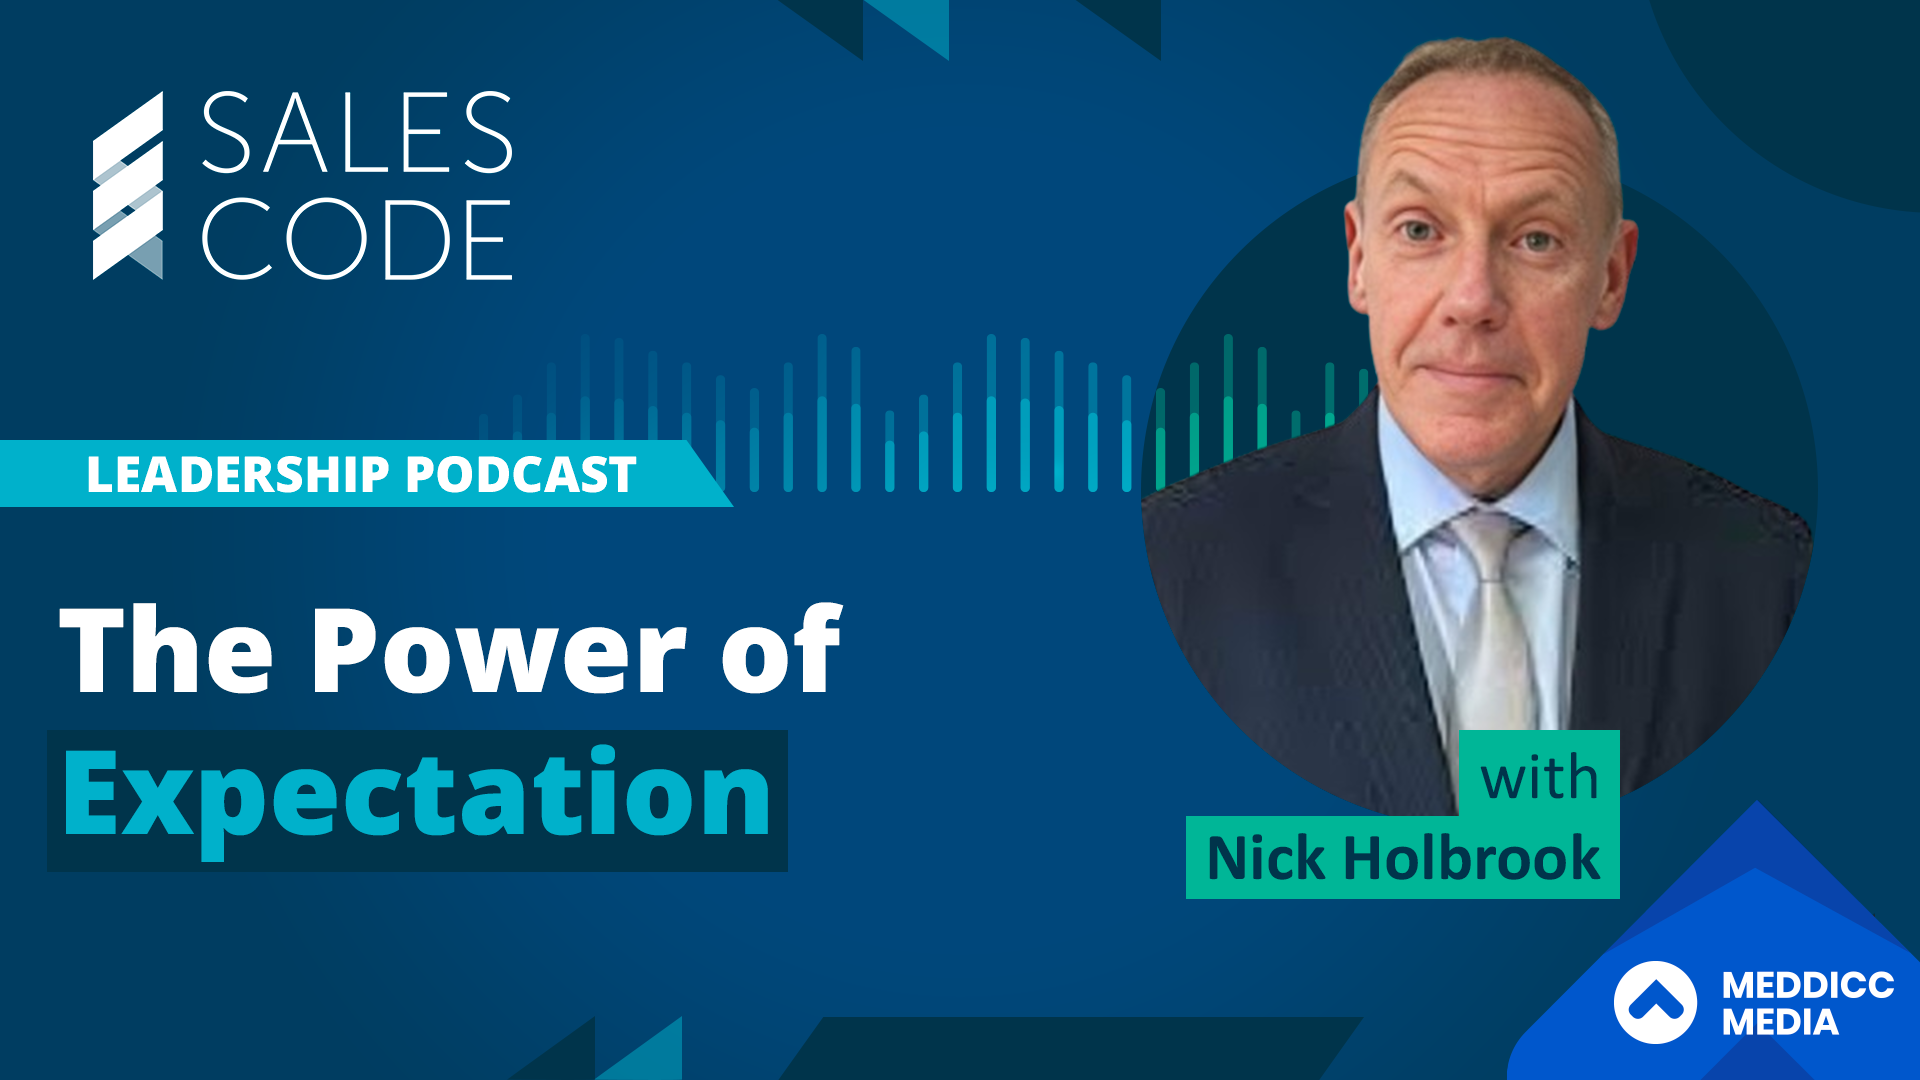 Sales Code: The Power of Expectation with Nick Holbrook